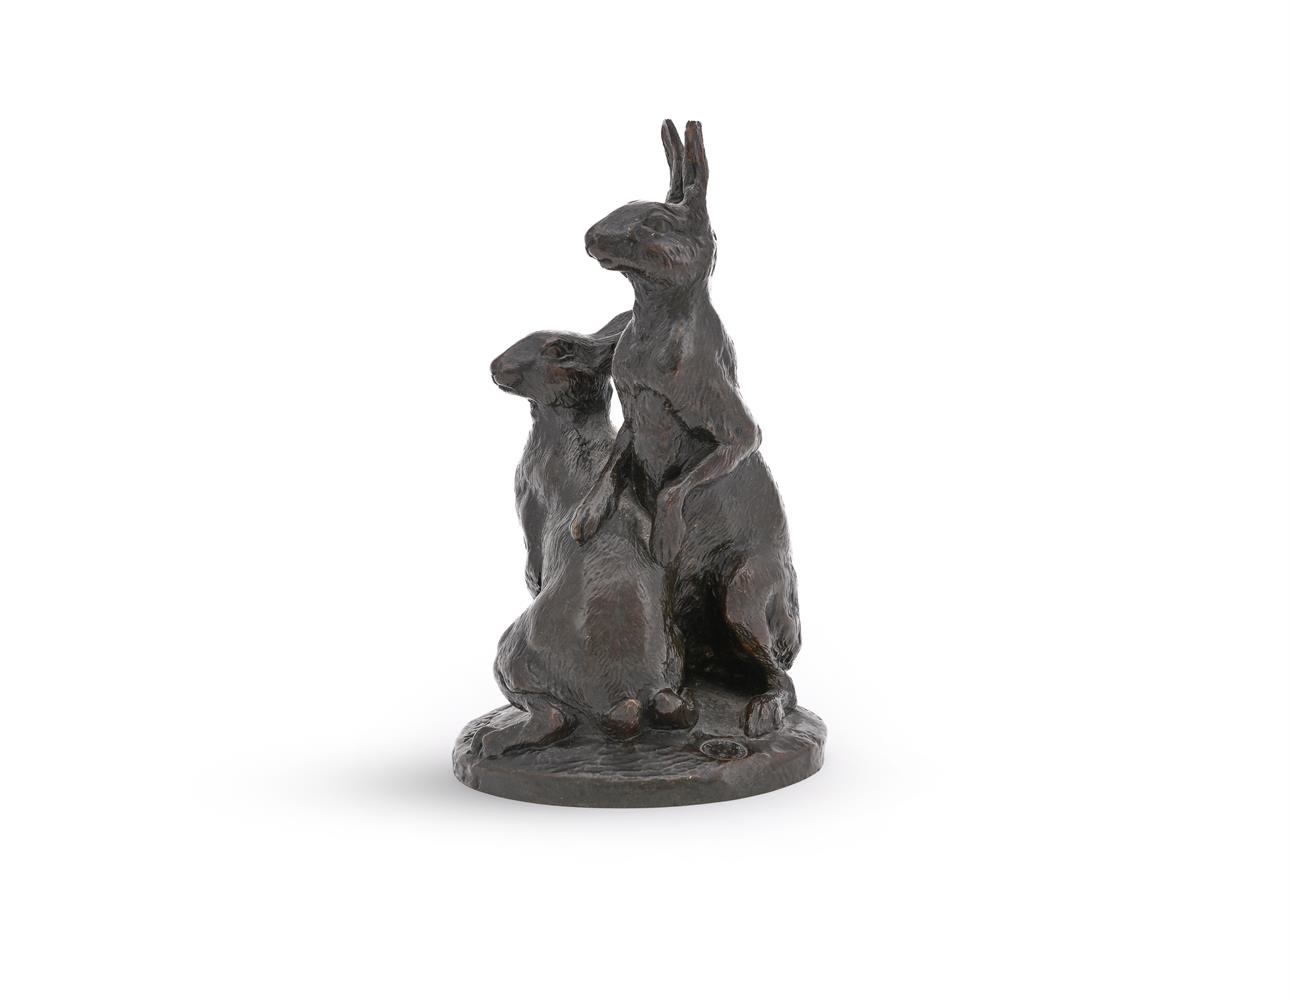 VICTOR PETER (FRENCH, 1840-1918), A BRONZE MODEL OF TWO ALERT HARES - Image 2 of 5